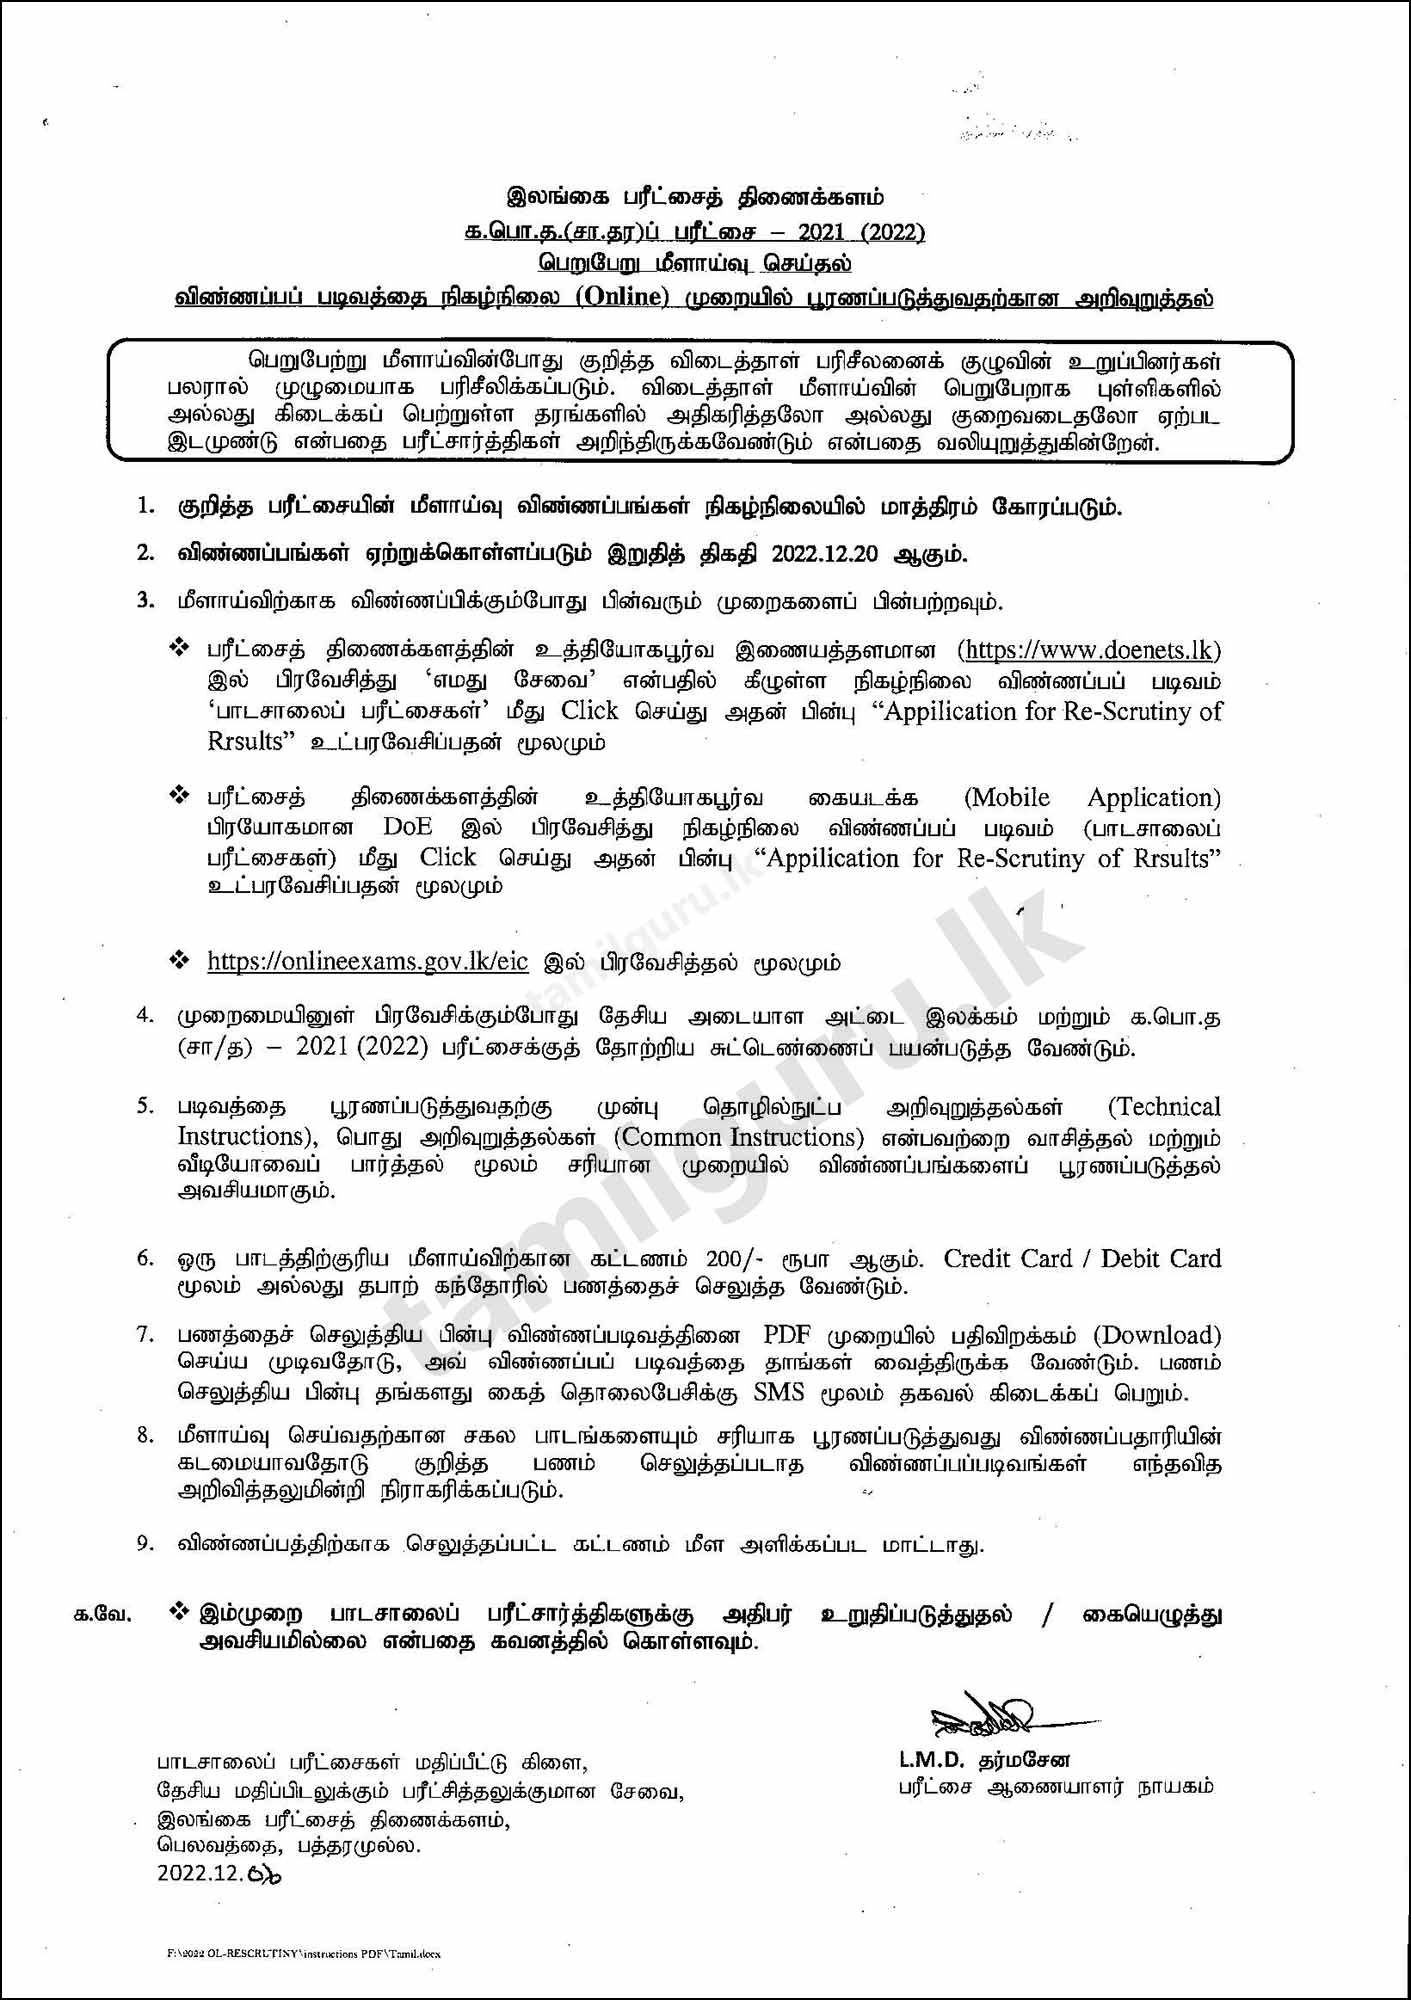 Re-Correction Application for G.C.E. O/L Examination 2021 (2022) - Department of Examinations